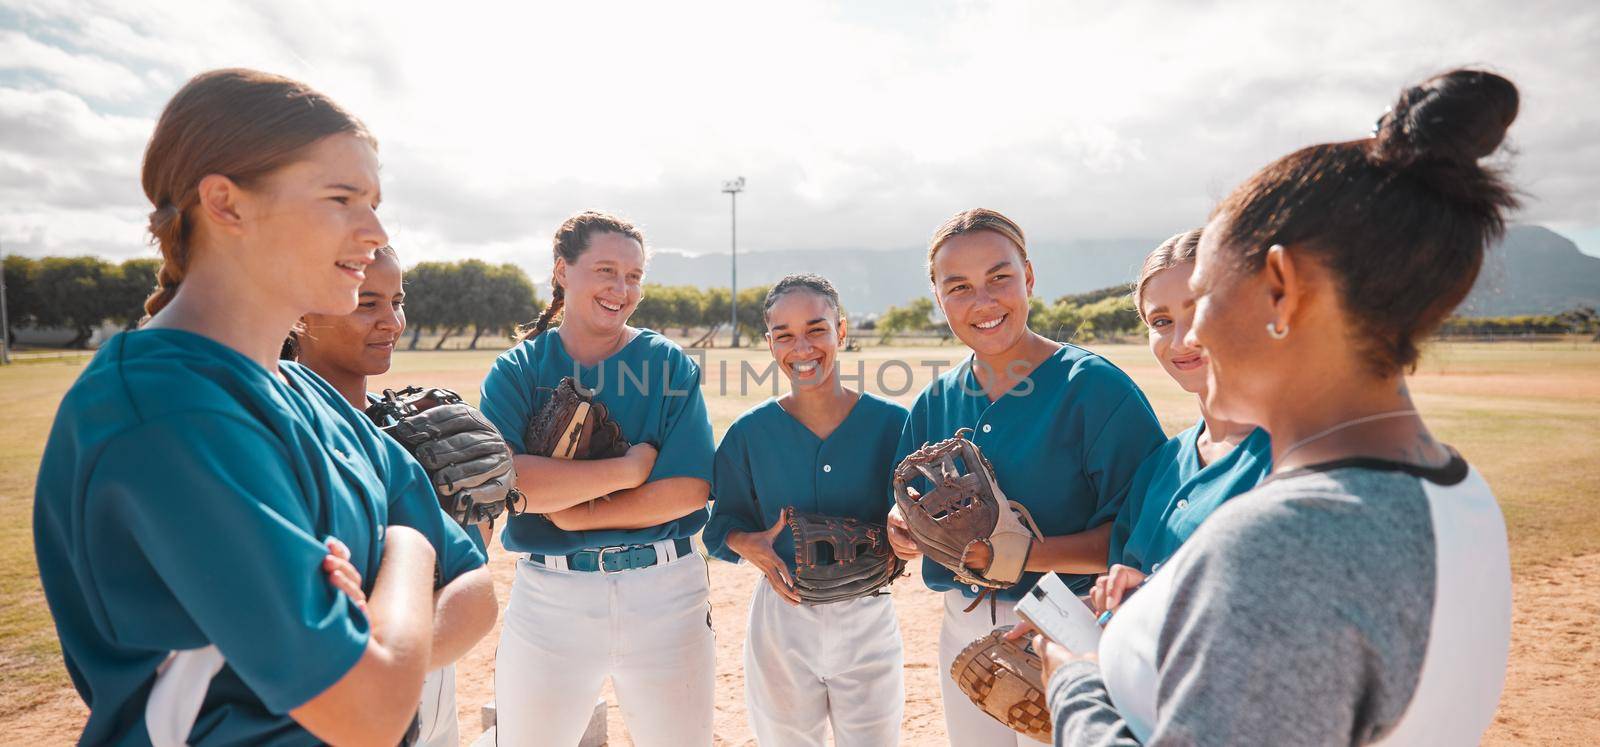 Baseball, team and women with coach talking, conversation or speaking about game strategy. Motivation, teamwork and collaboration with leader coaching girls in softball sports training exercise